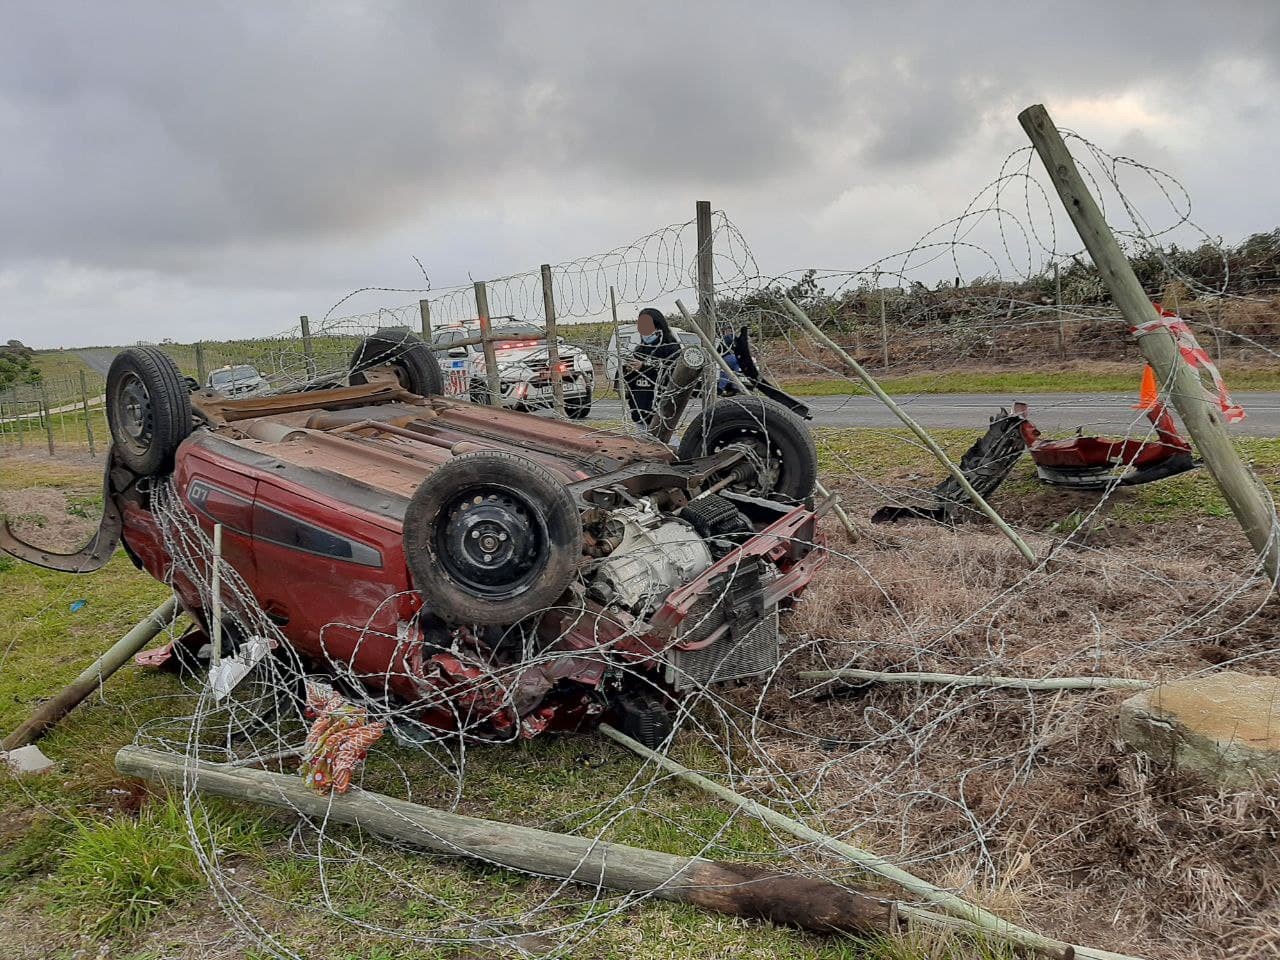 Driver and passenger seriously injured in roll-over